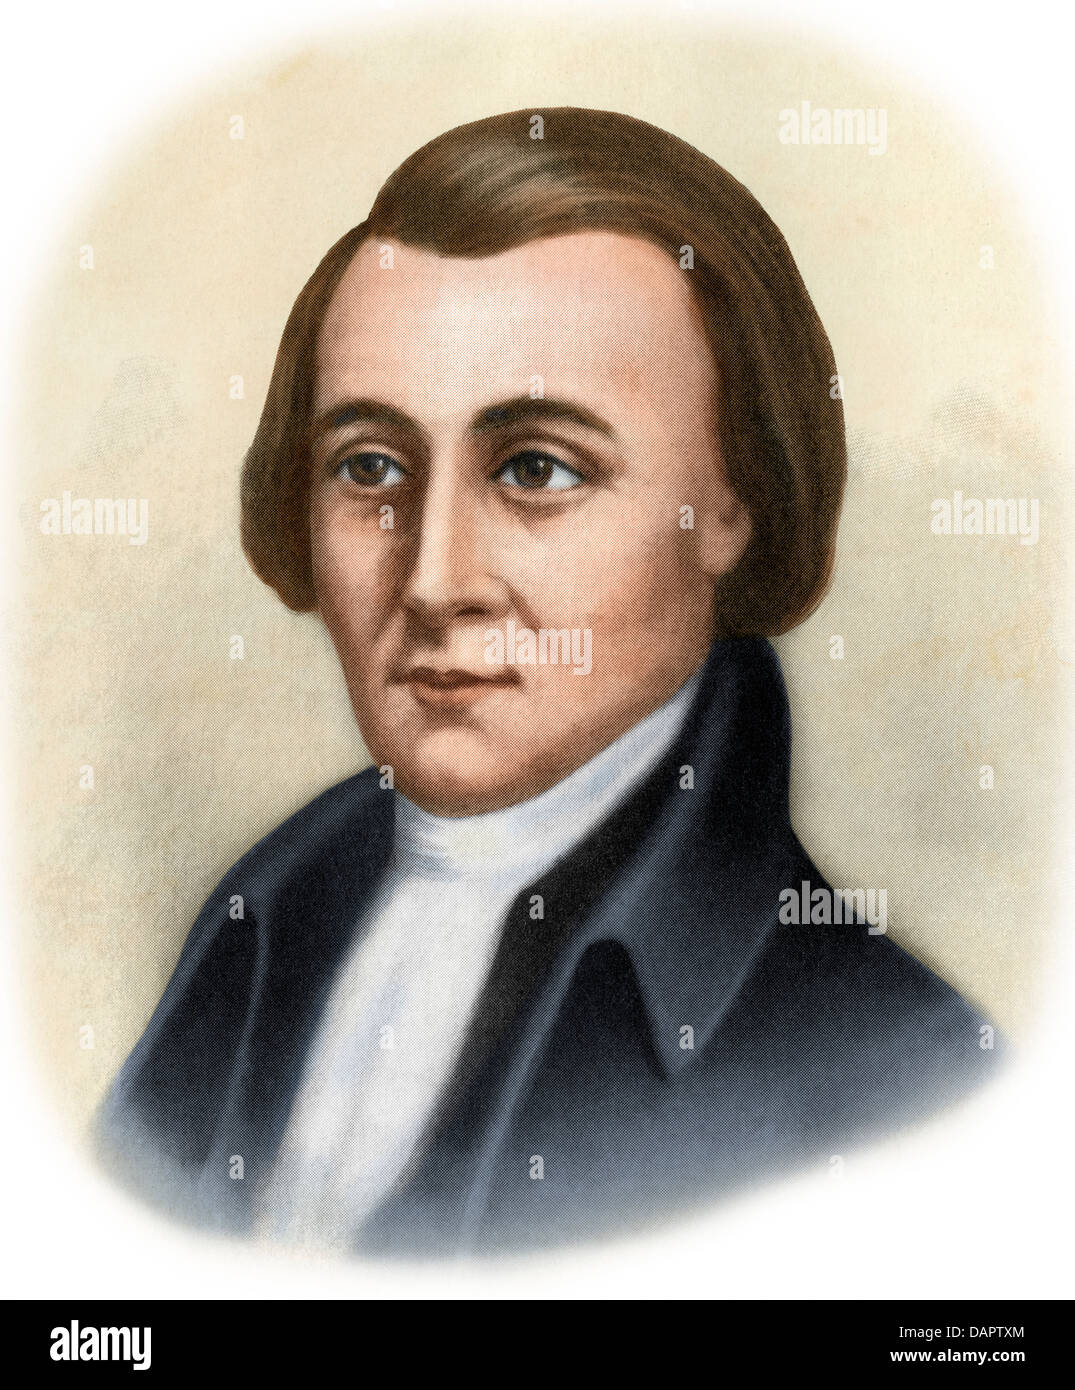 Matthew Thornton, a signer of the Declaration of Independence from New Hampshire. Hand-colored halftone of an illustration Stock Photo